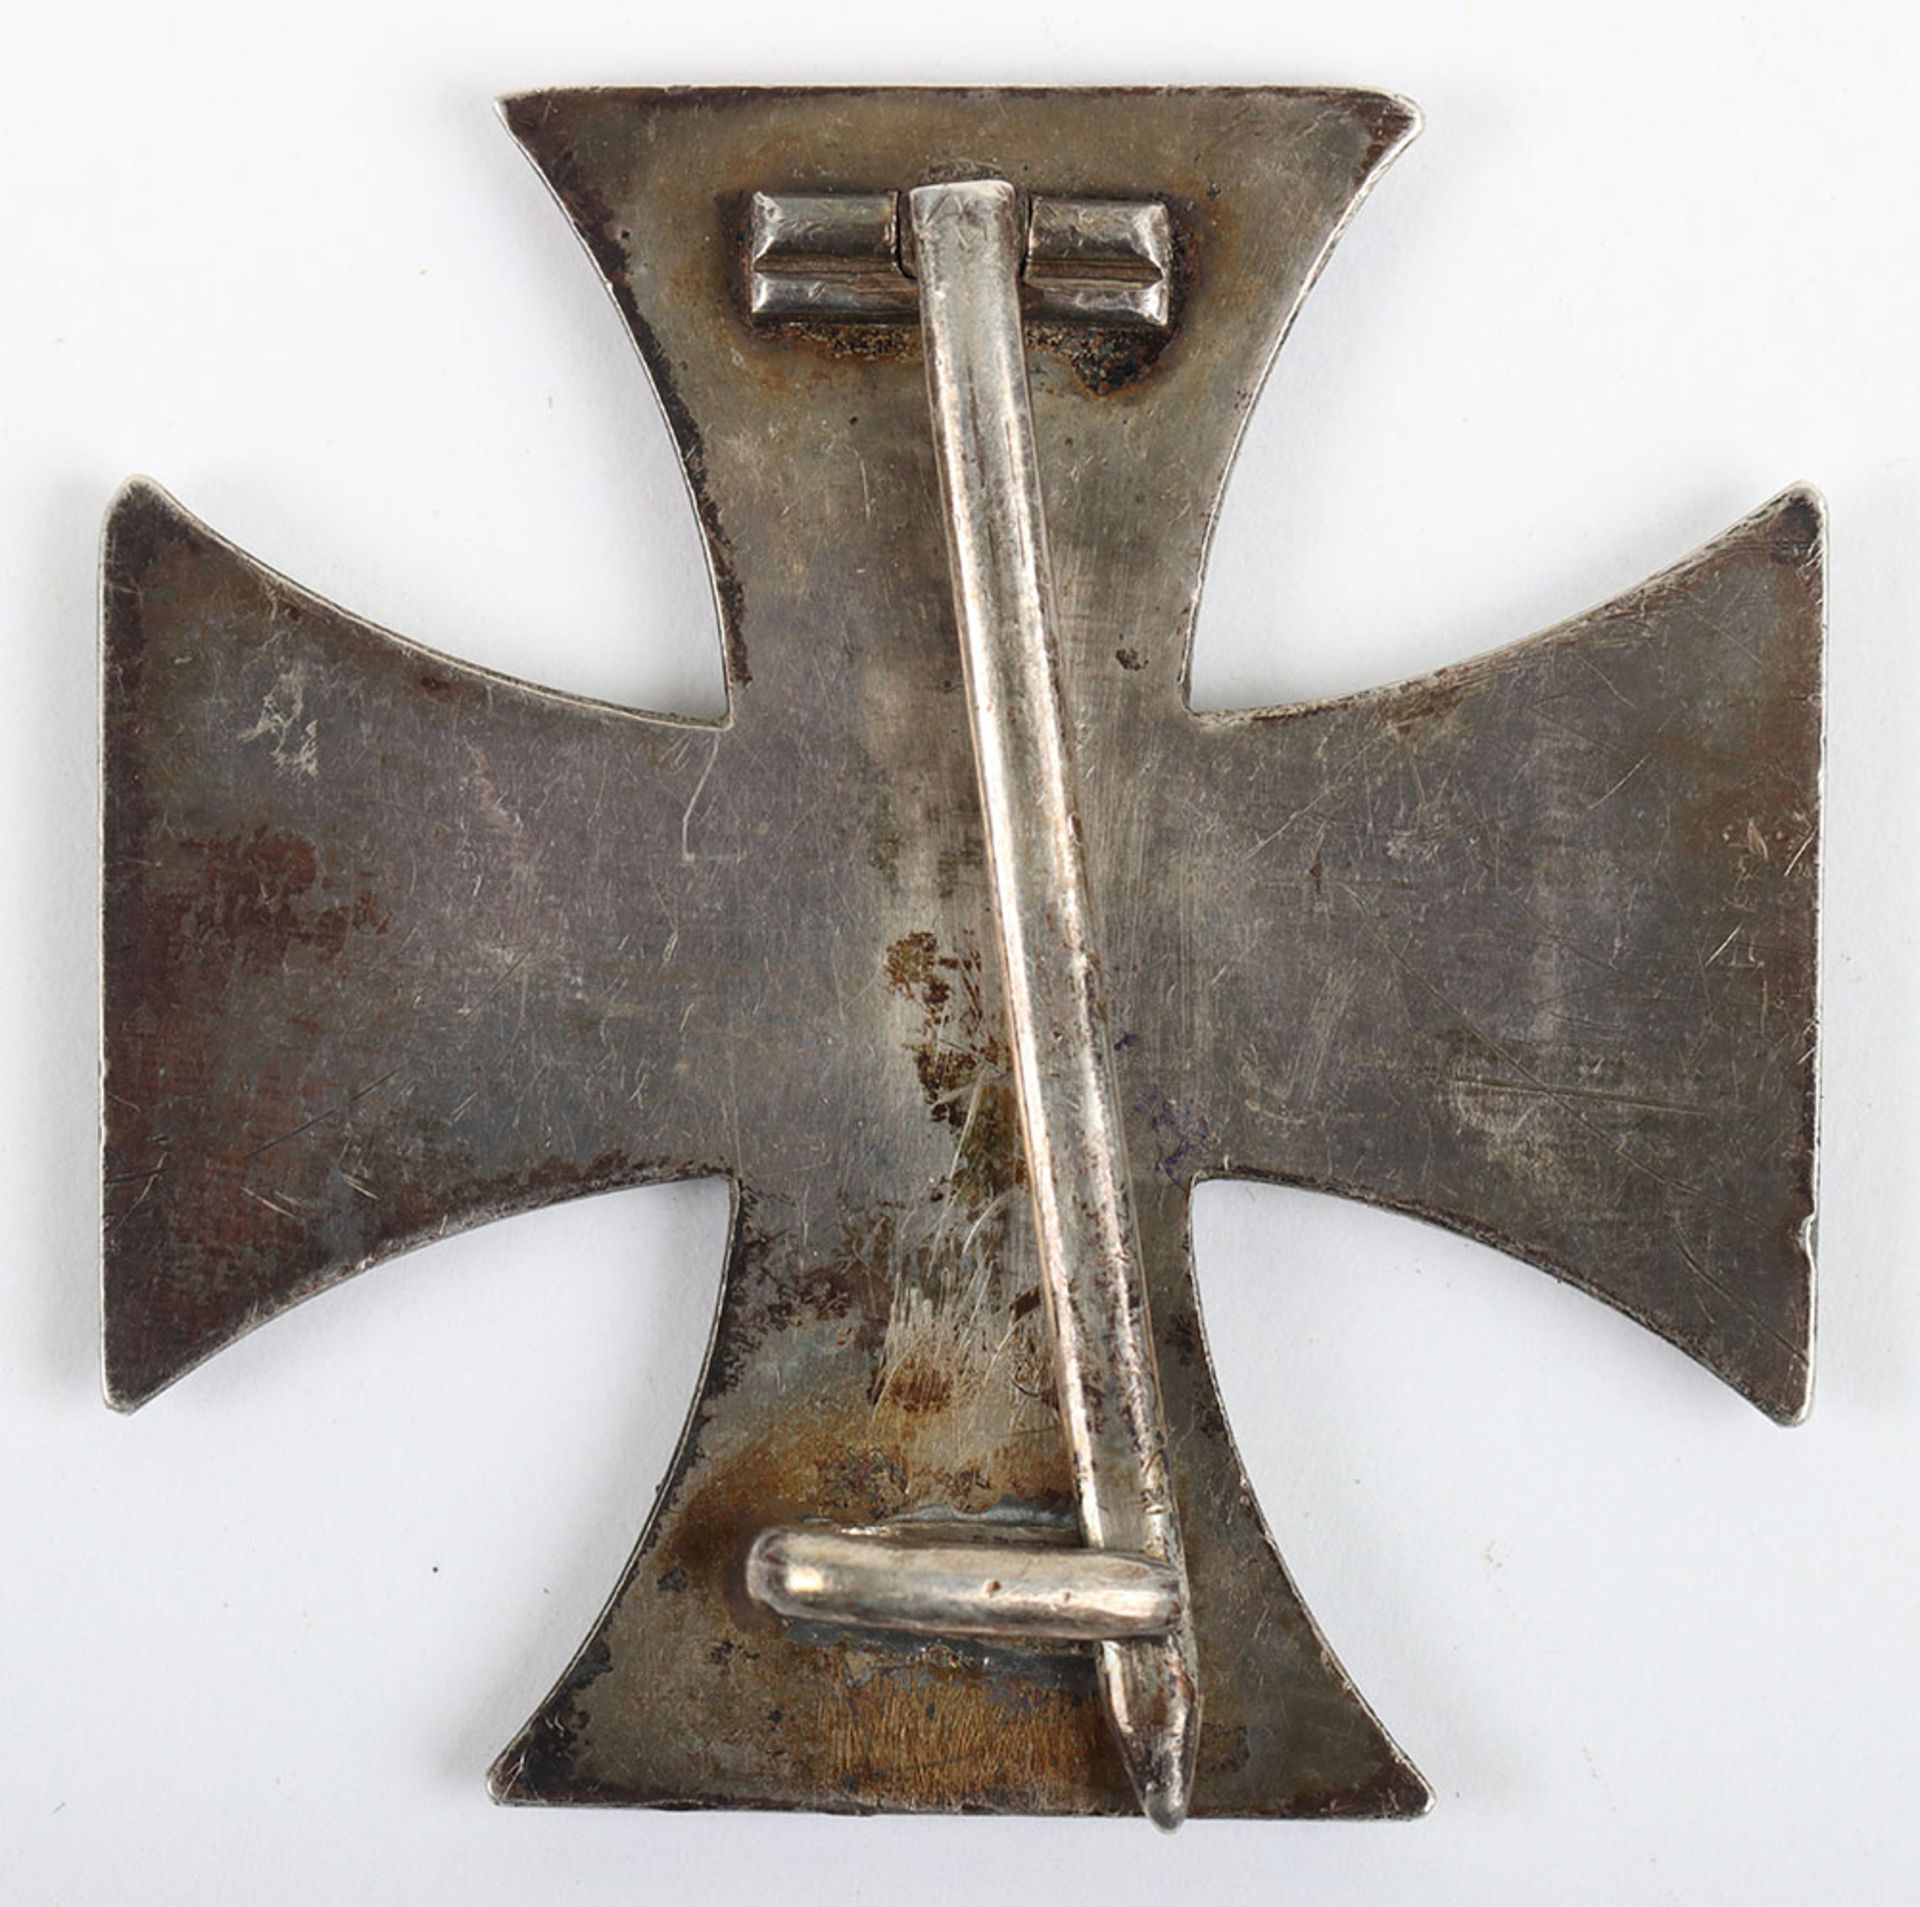 1914 Iron Cross 1st Class by KO with Case - Image 8 of 13